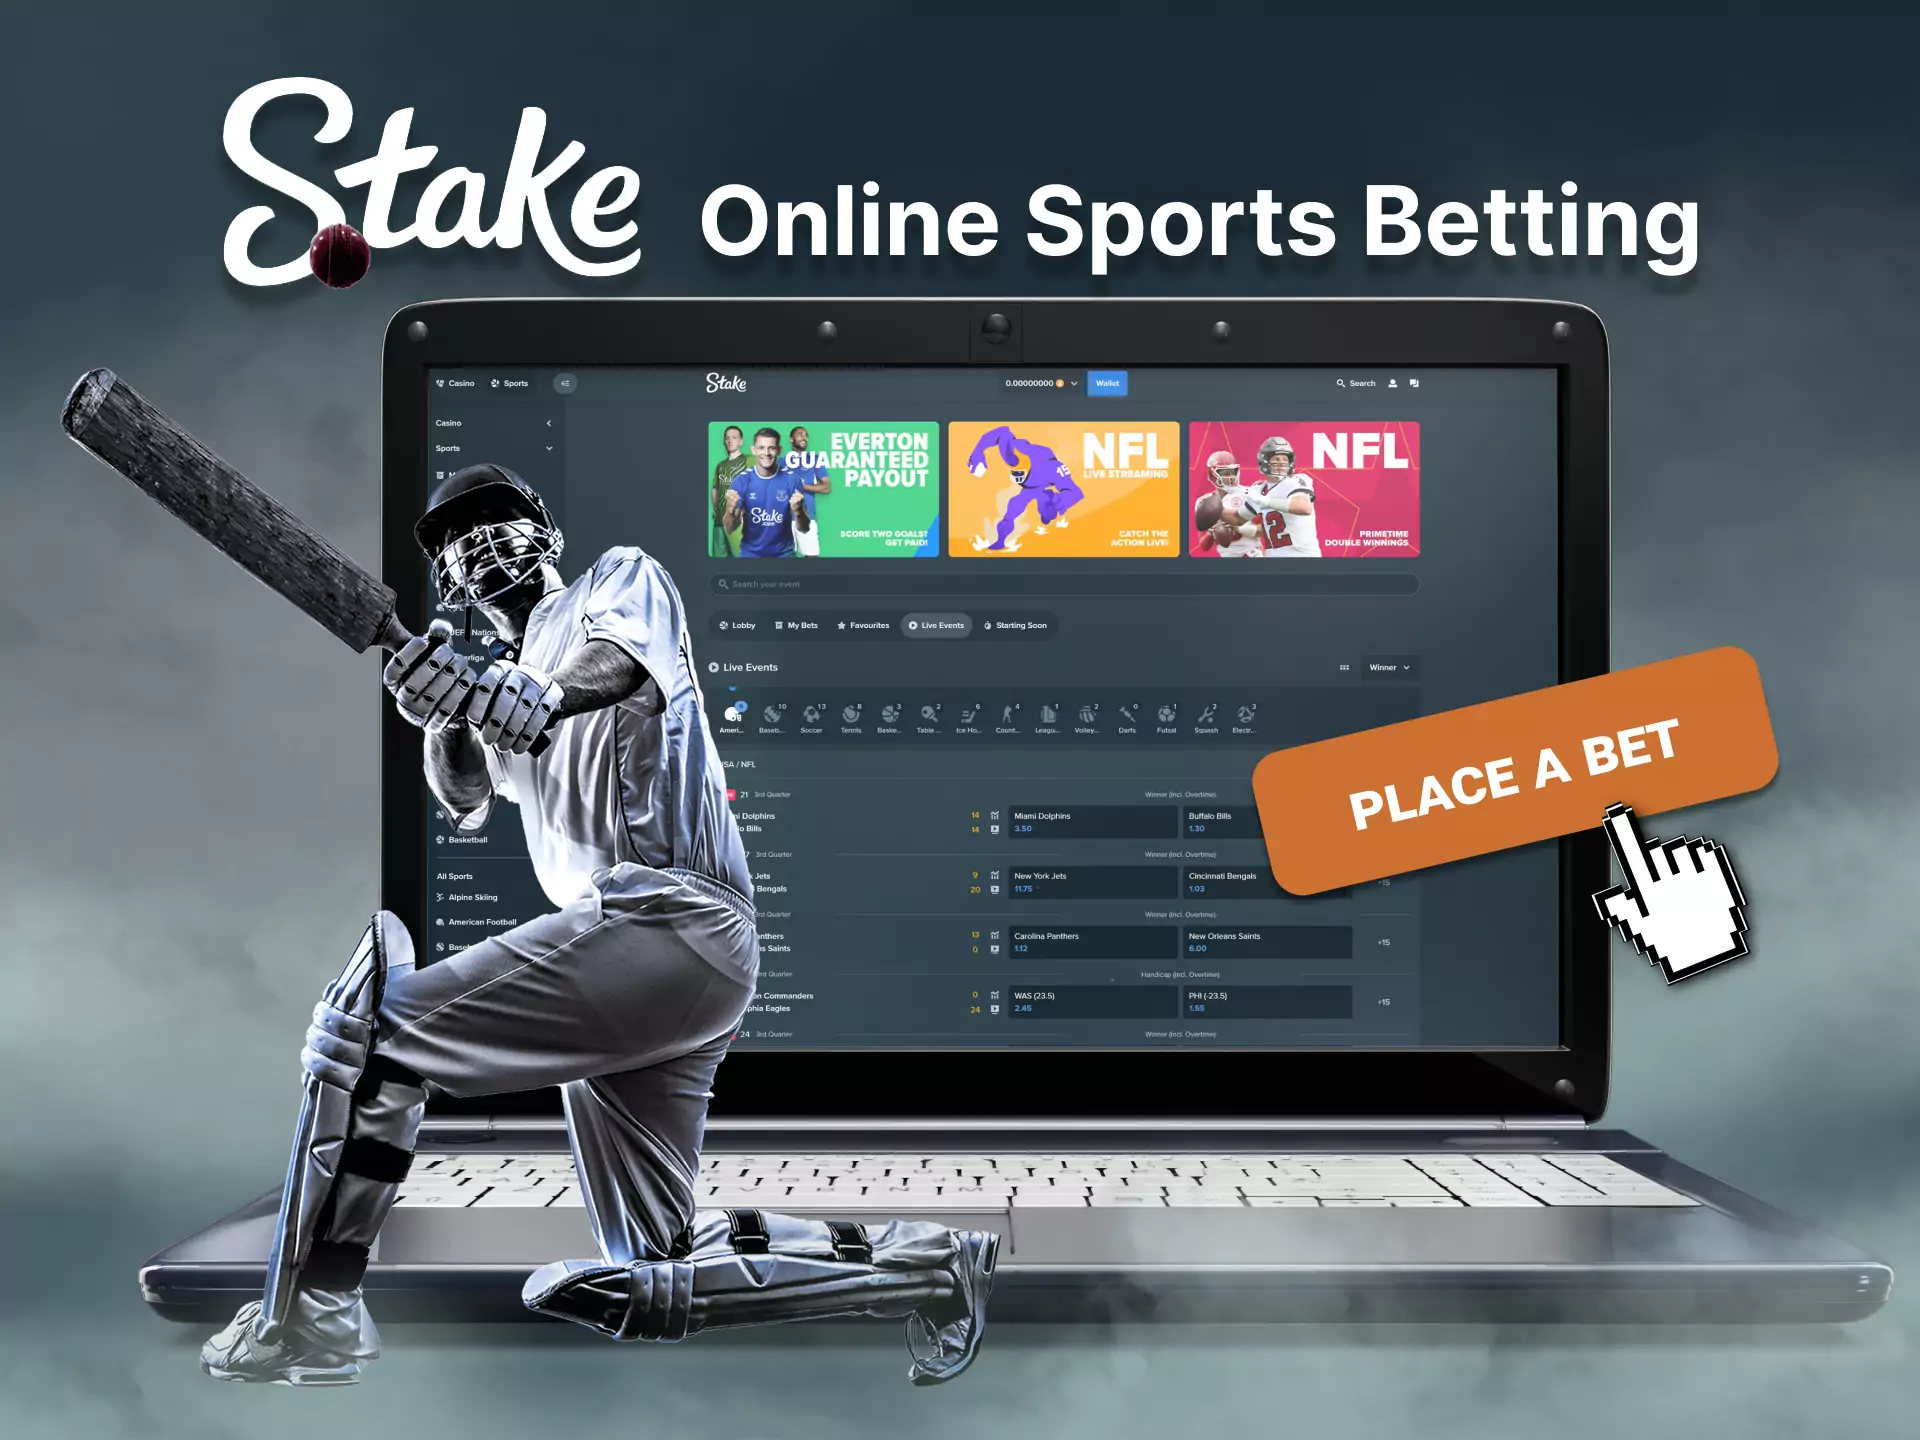 In the sports section of Stake, you can place bets on available matches.